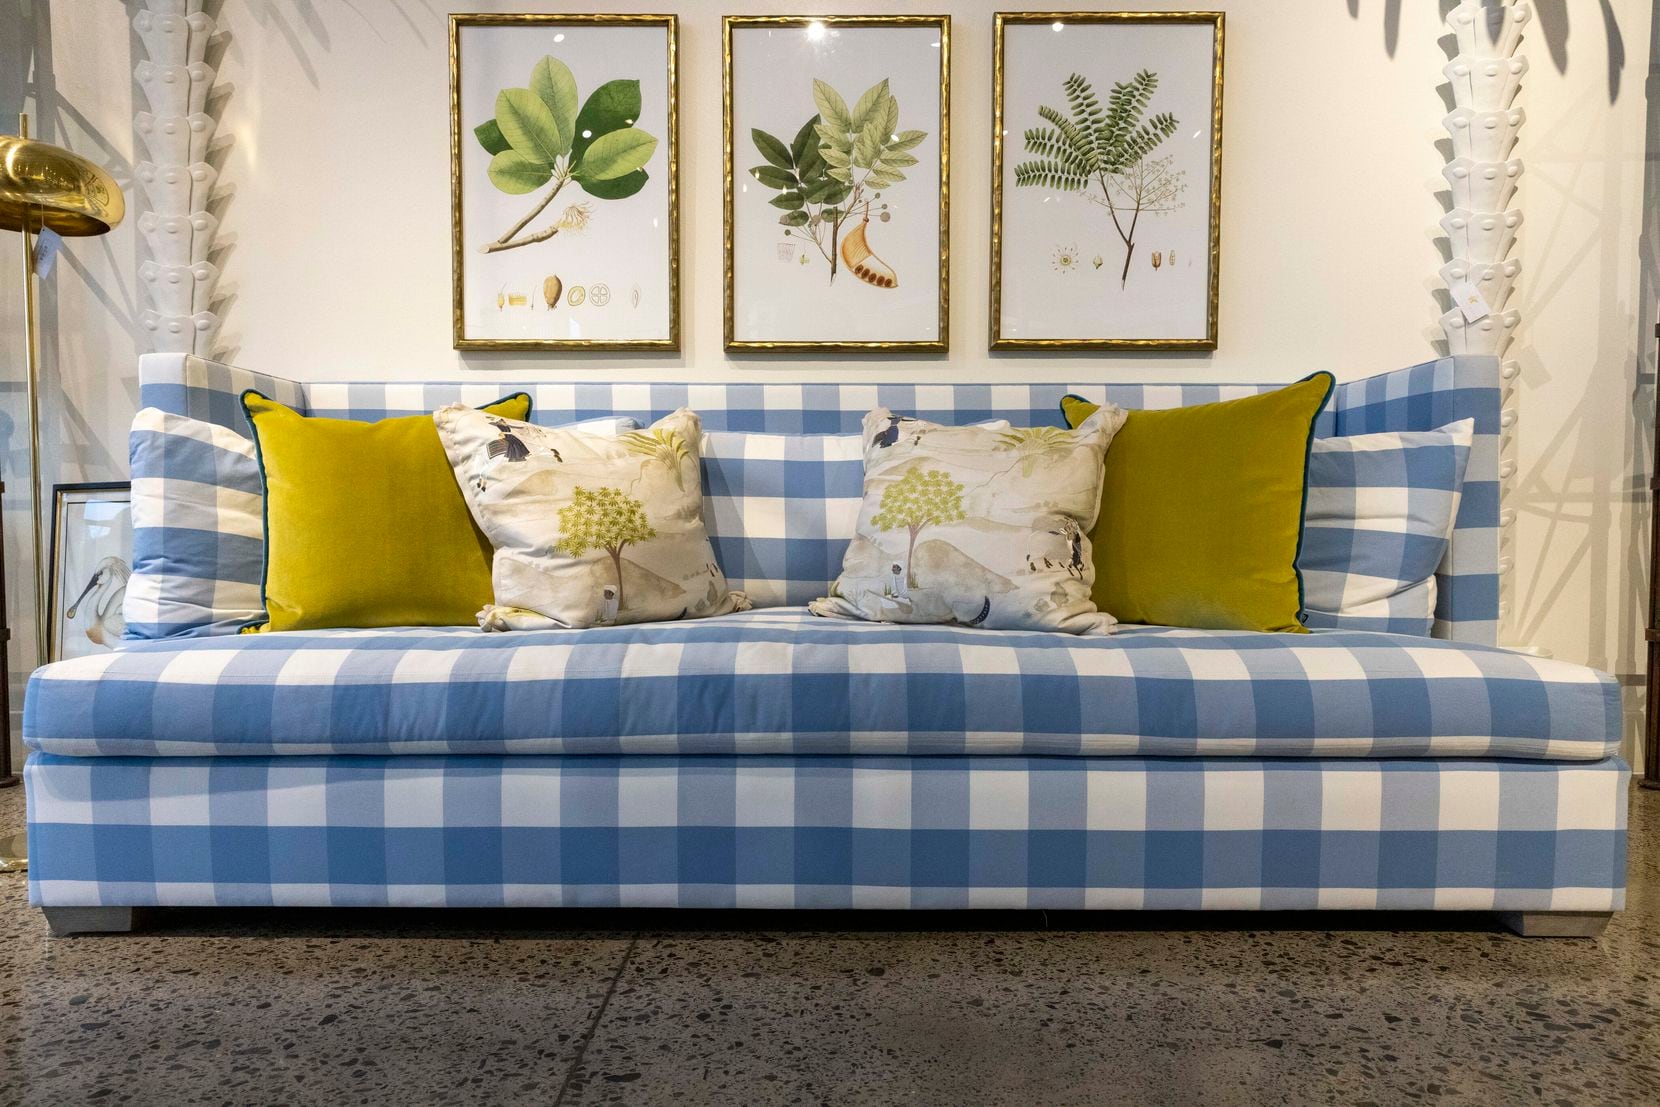 This blue and white checkered sofa is for sale for $ 13,500 Coco & Dash in Dallas and has been the subject of a legal dispute between the store owners and the Swedish mattress manufacturer Hästens.